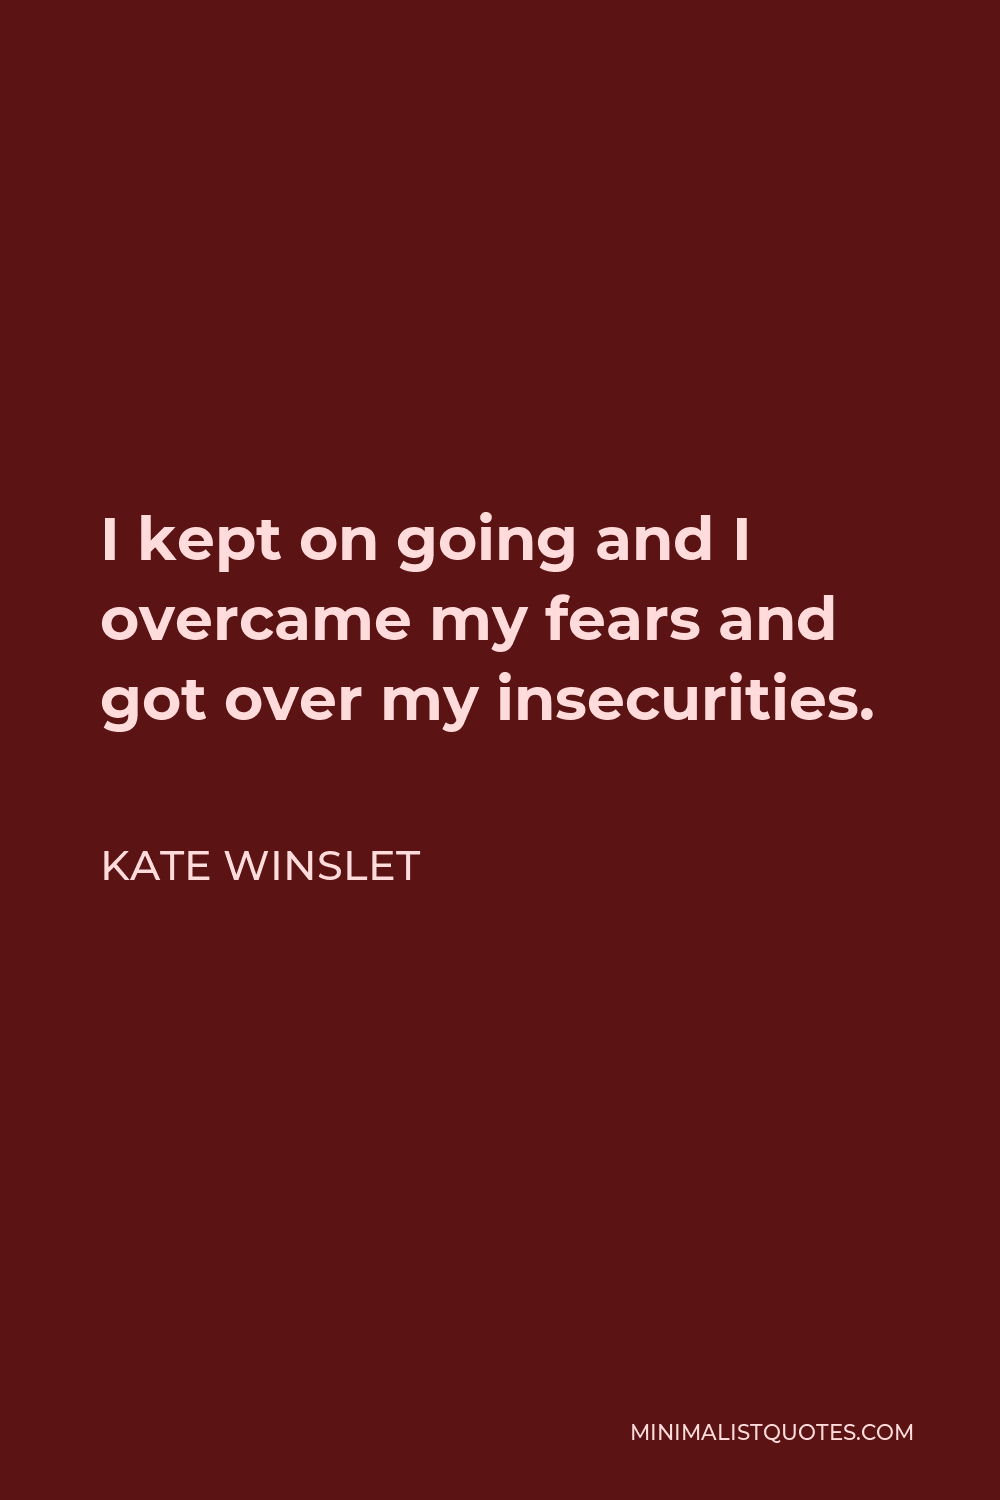 Kate Winslet Quote - I kept on going and I overcame my fears and got over my insecurities.